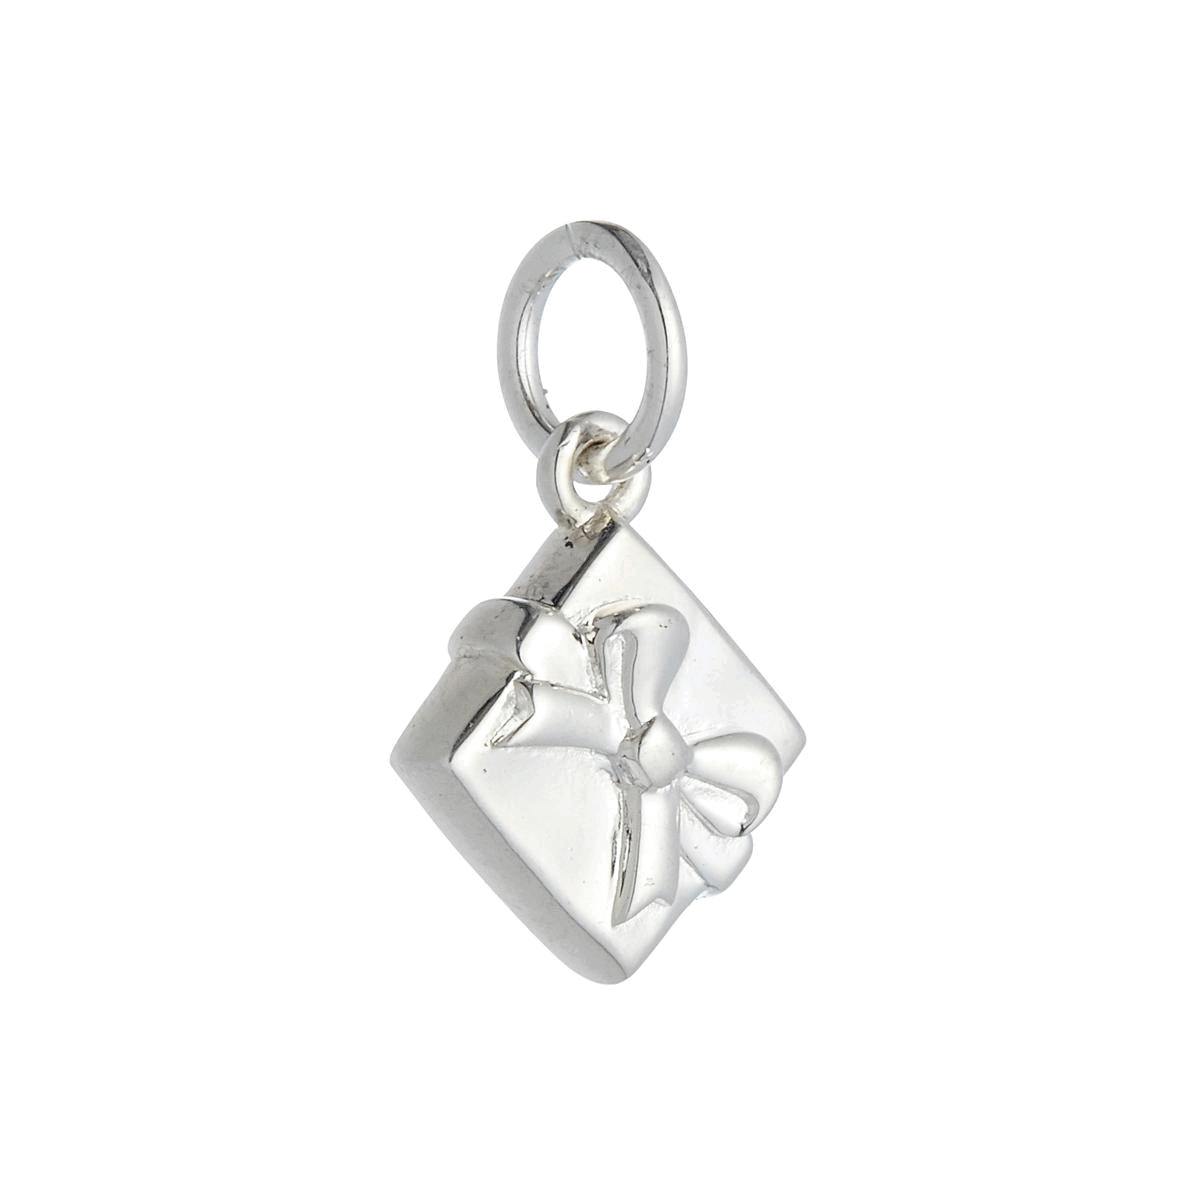 Personalised Silver Present with bow charm